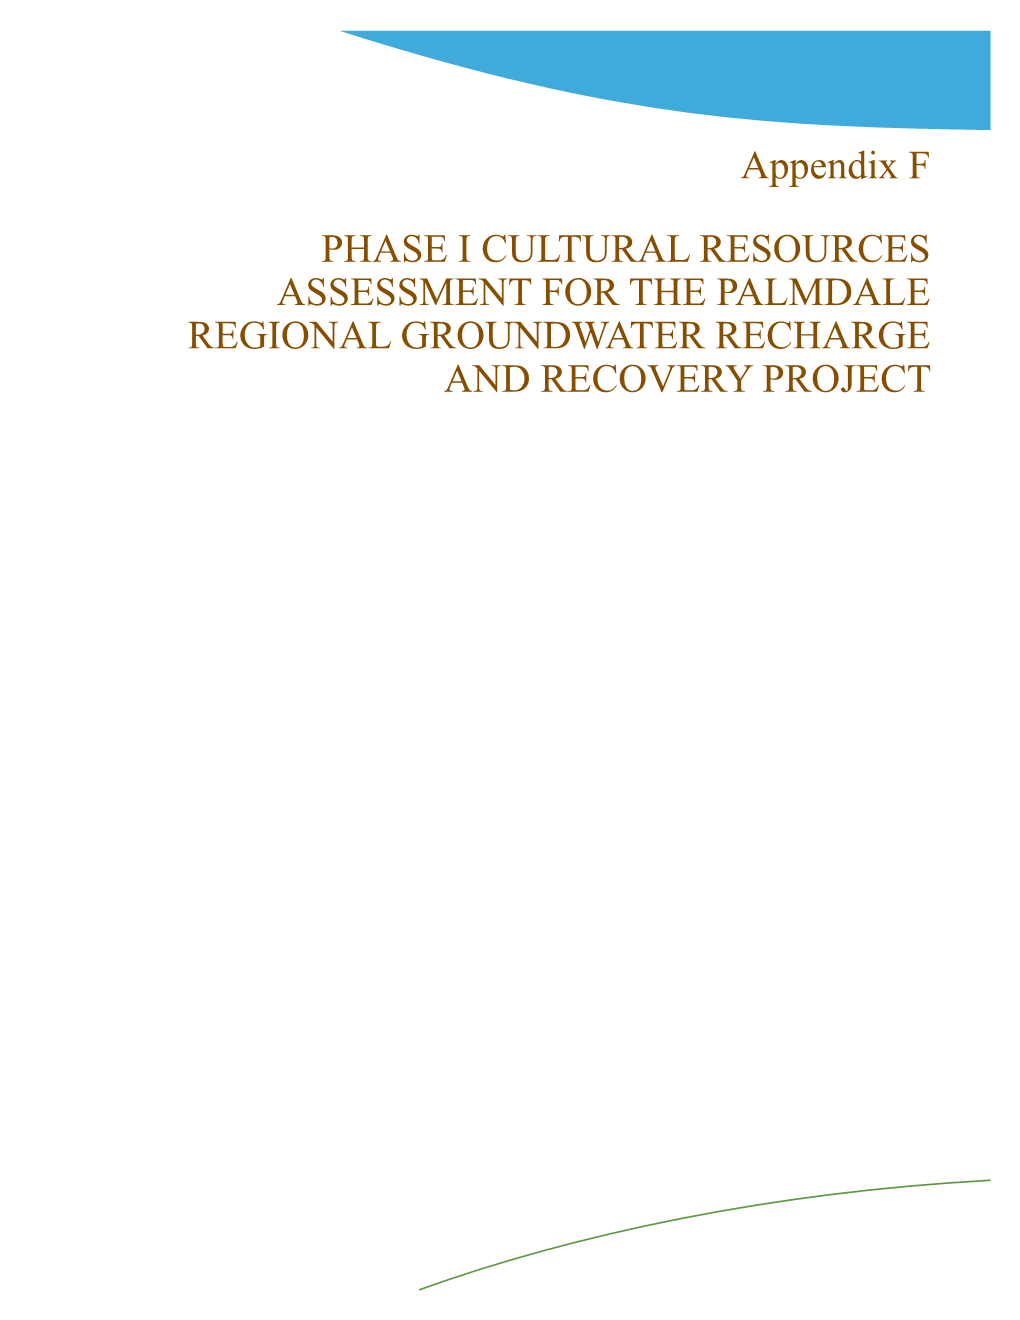 Appendix F PHASE I CULTURAL RESOURCES ASSESSMENT FOR